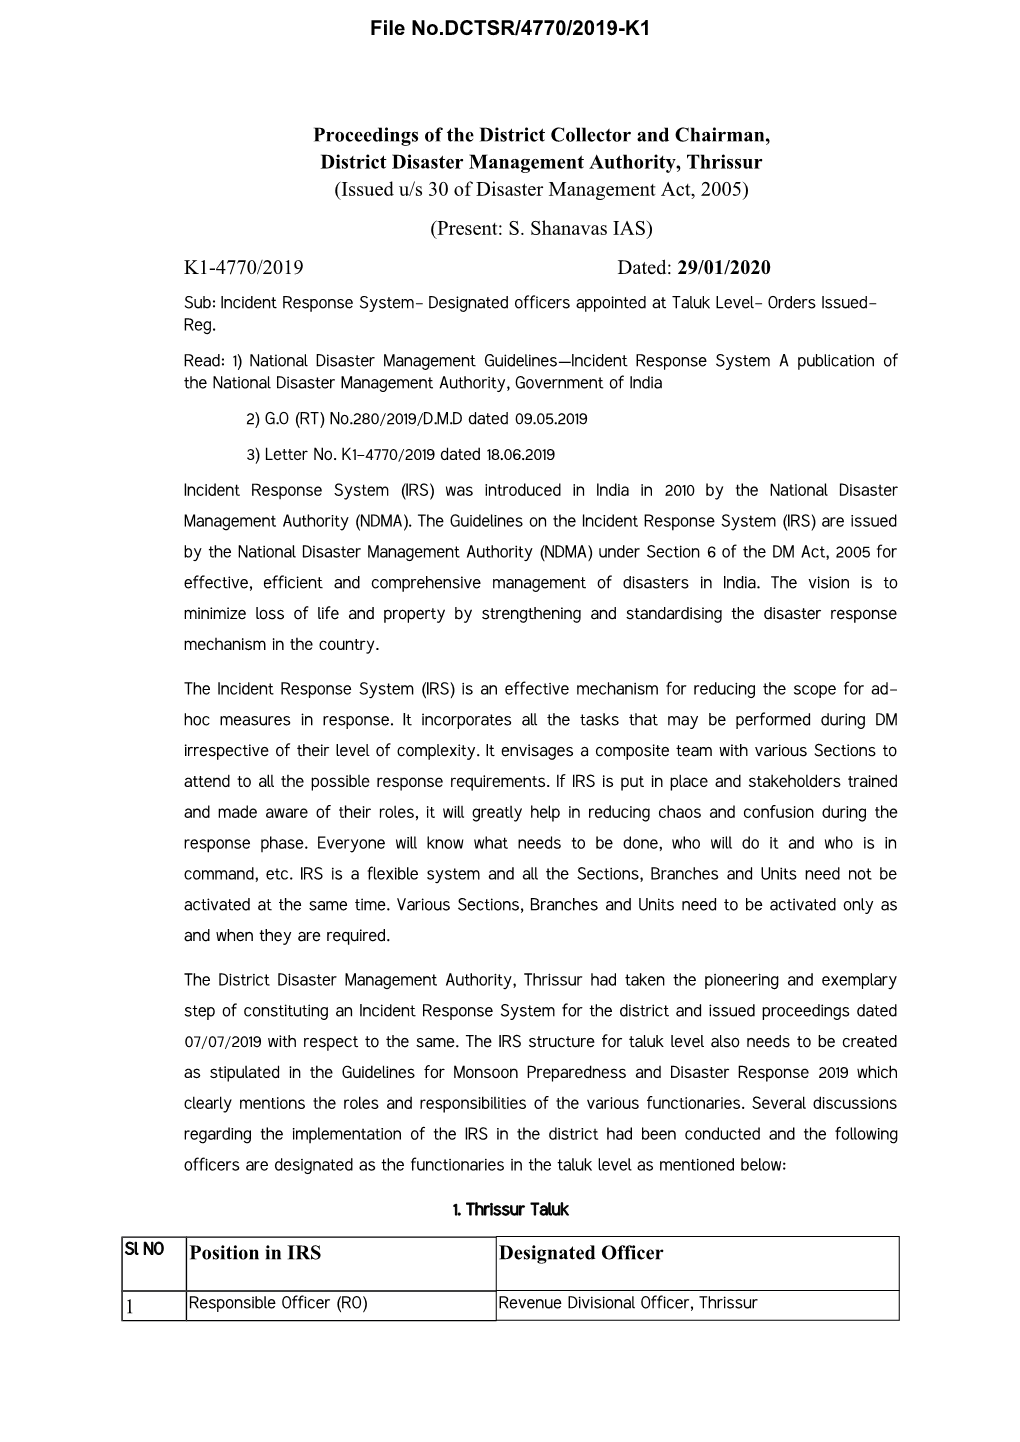 Proceedings of the District Collector and Chairman, District Disaster Management Authority, Thrissur (Issued U/S 30 of Disaster Management Act, 2005) (Present: S